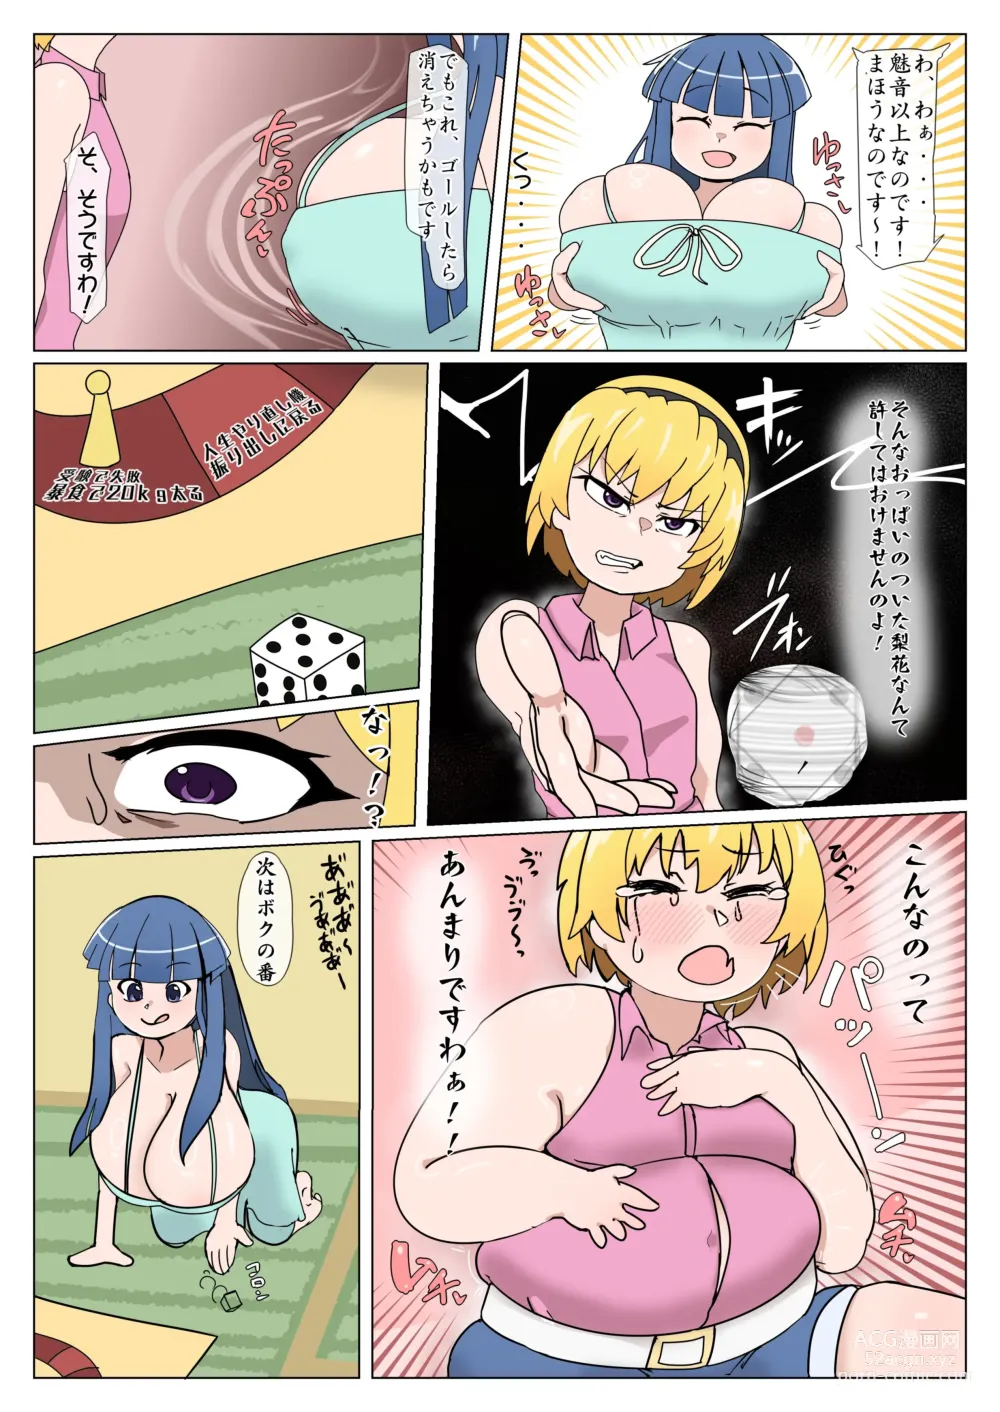 Page 2 of doujinshi Dice game